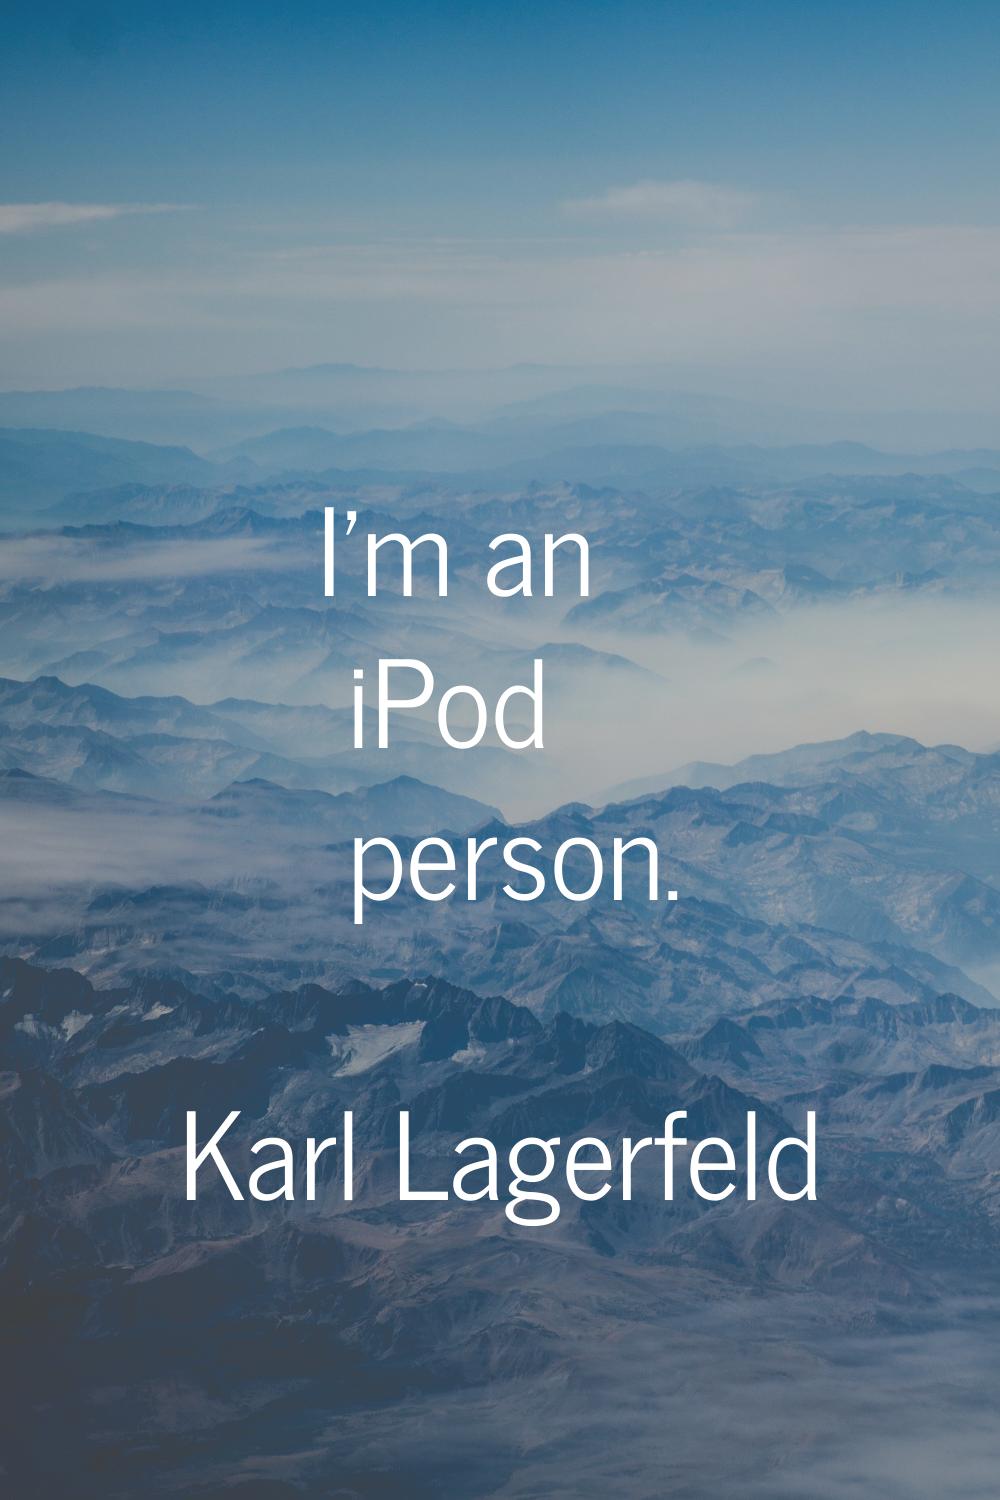 I'm an iPod person.